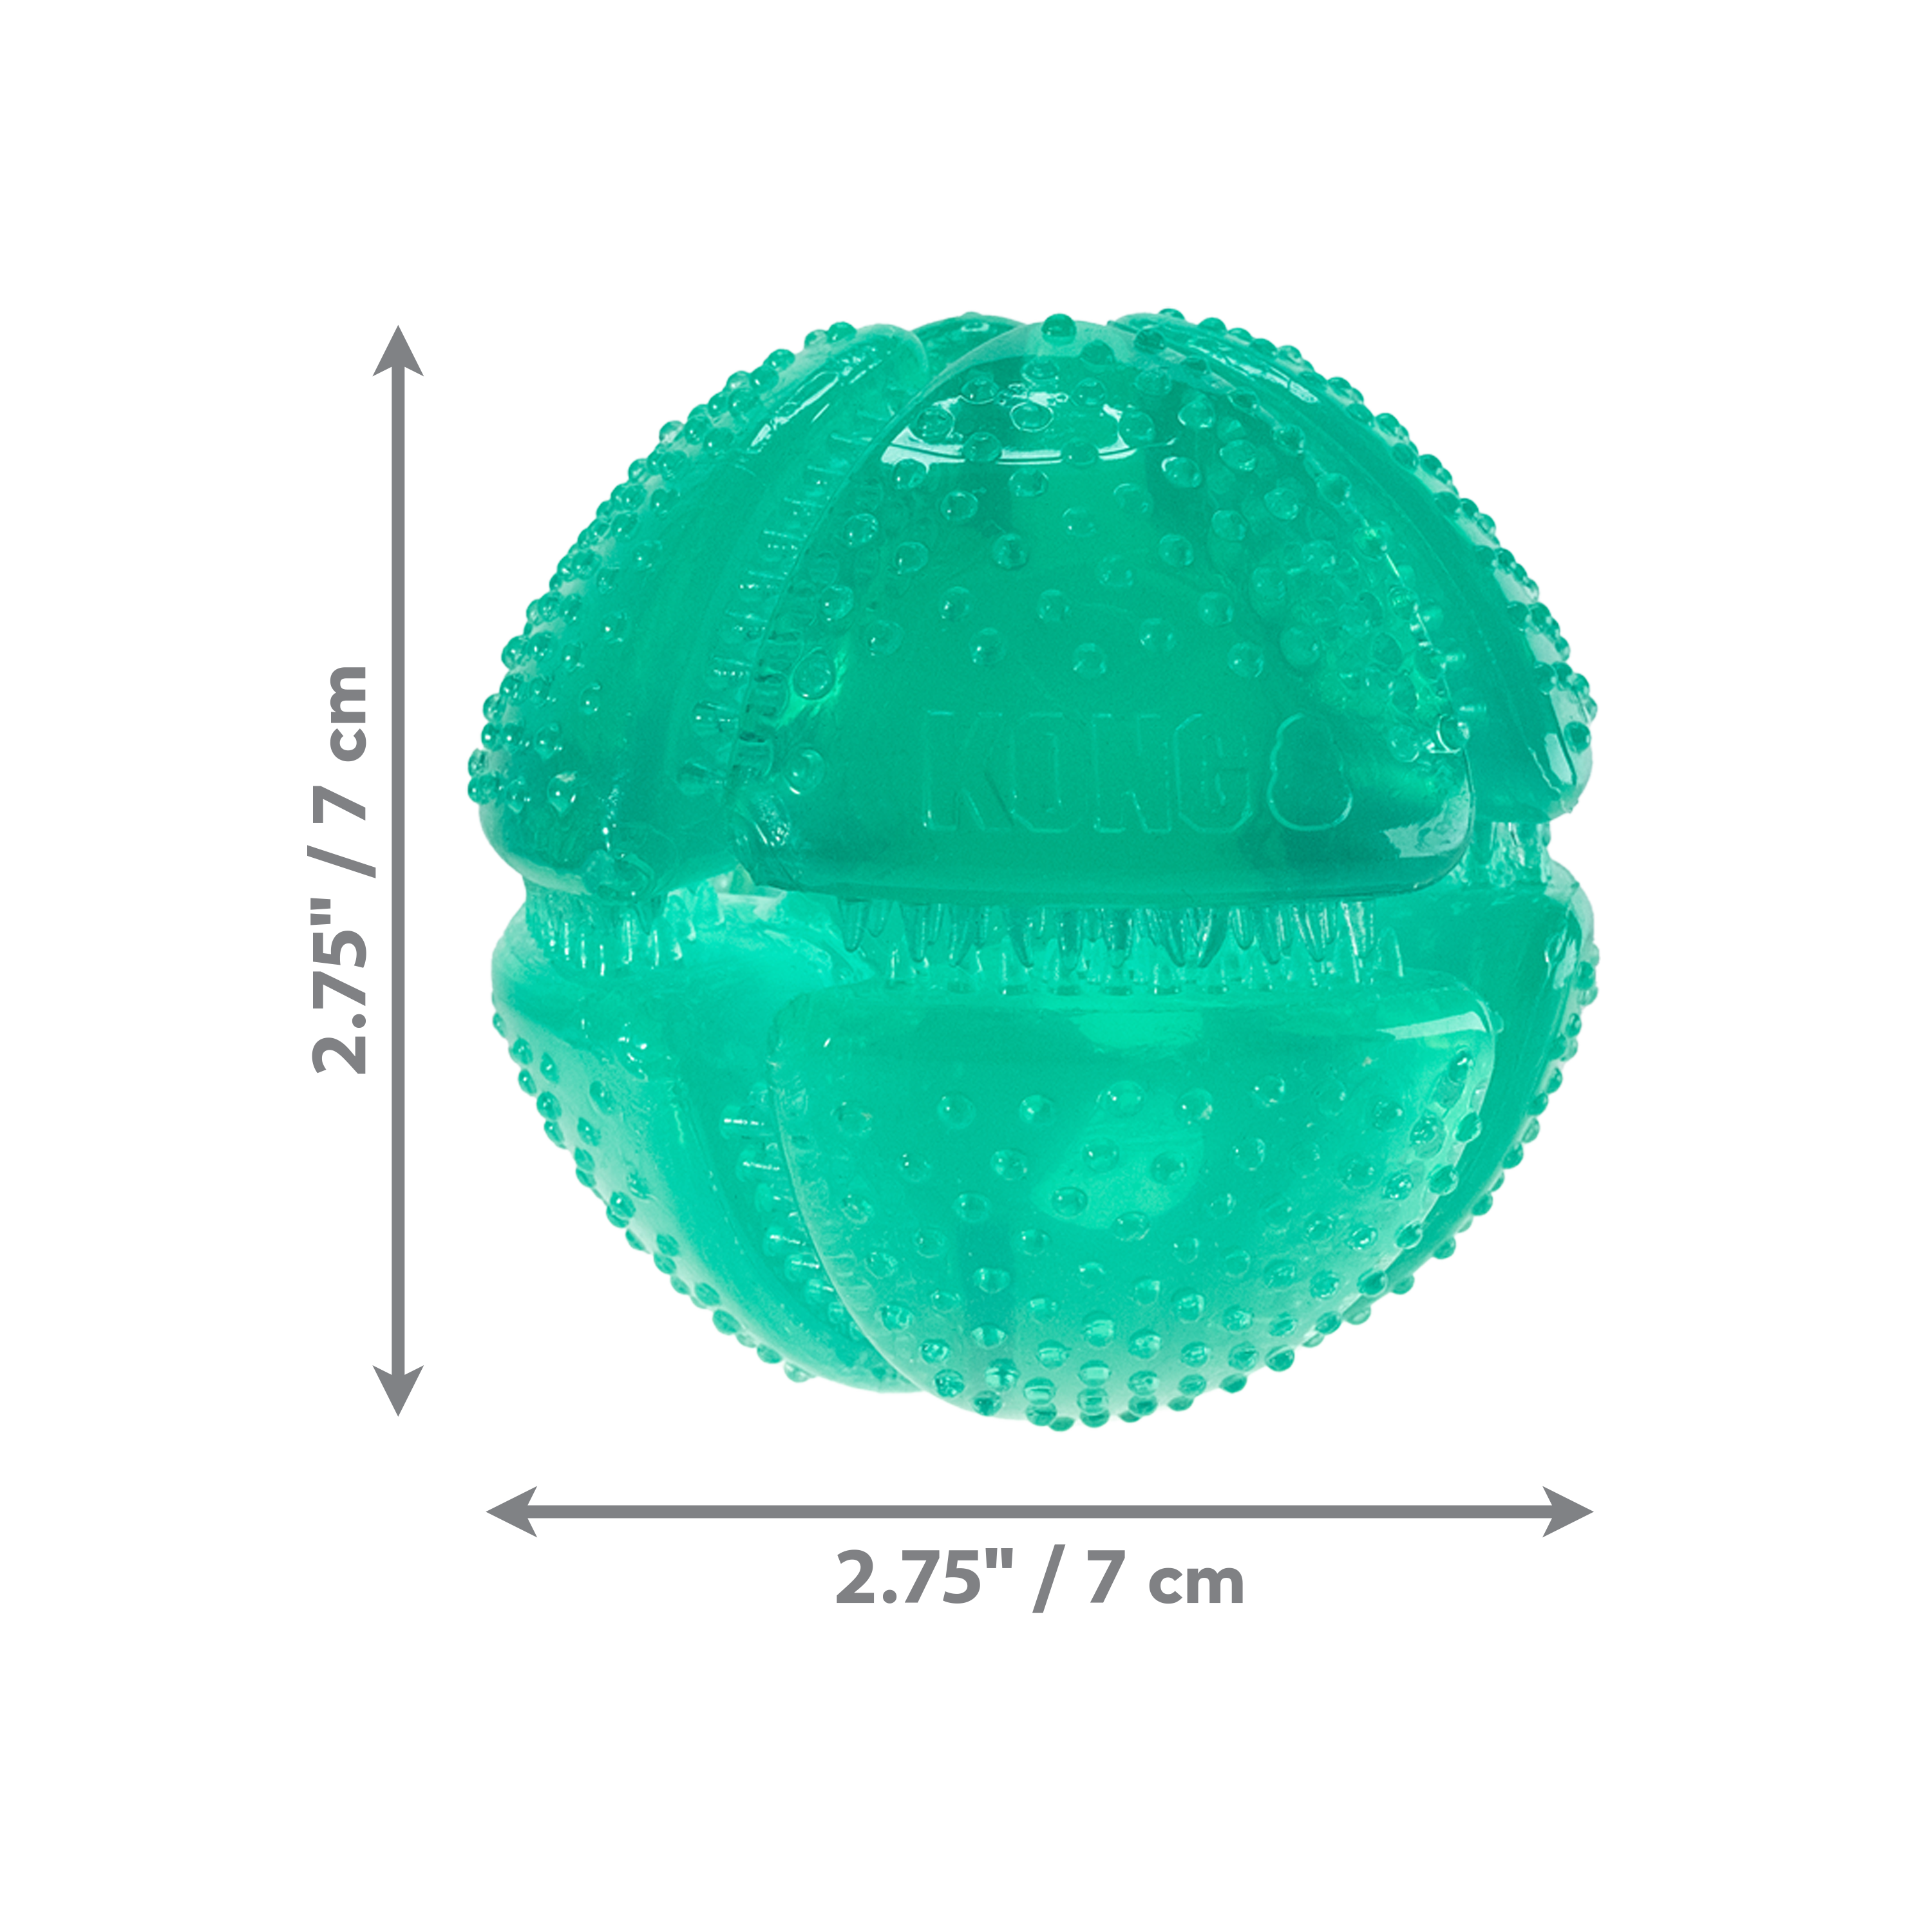 Squeezz Dental Ball dimoffpack product image